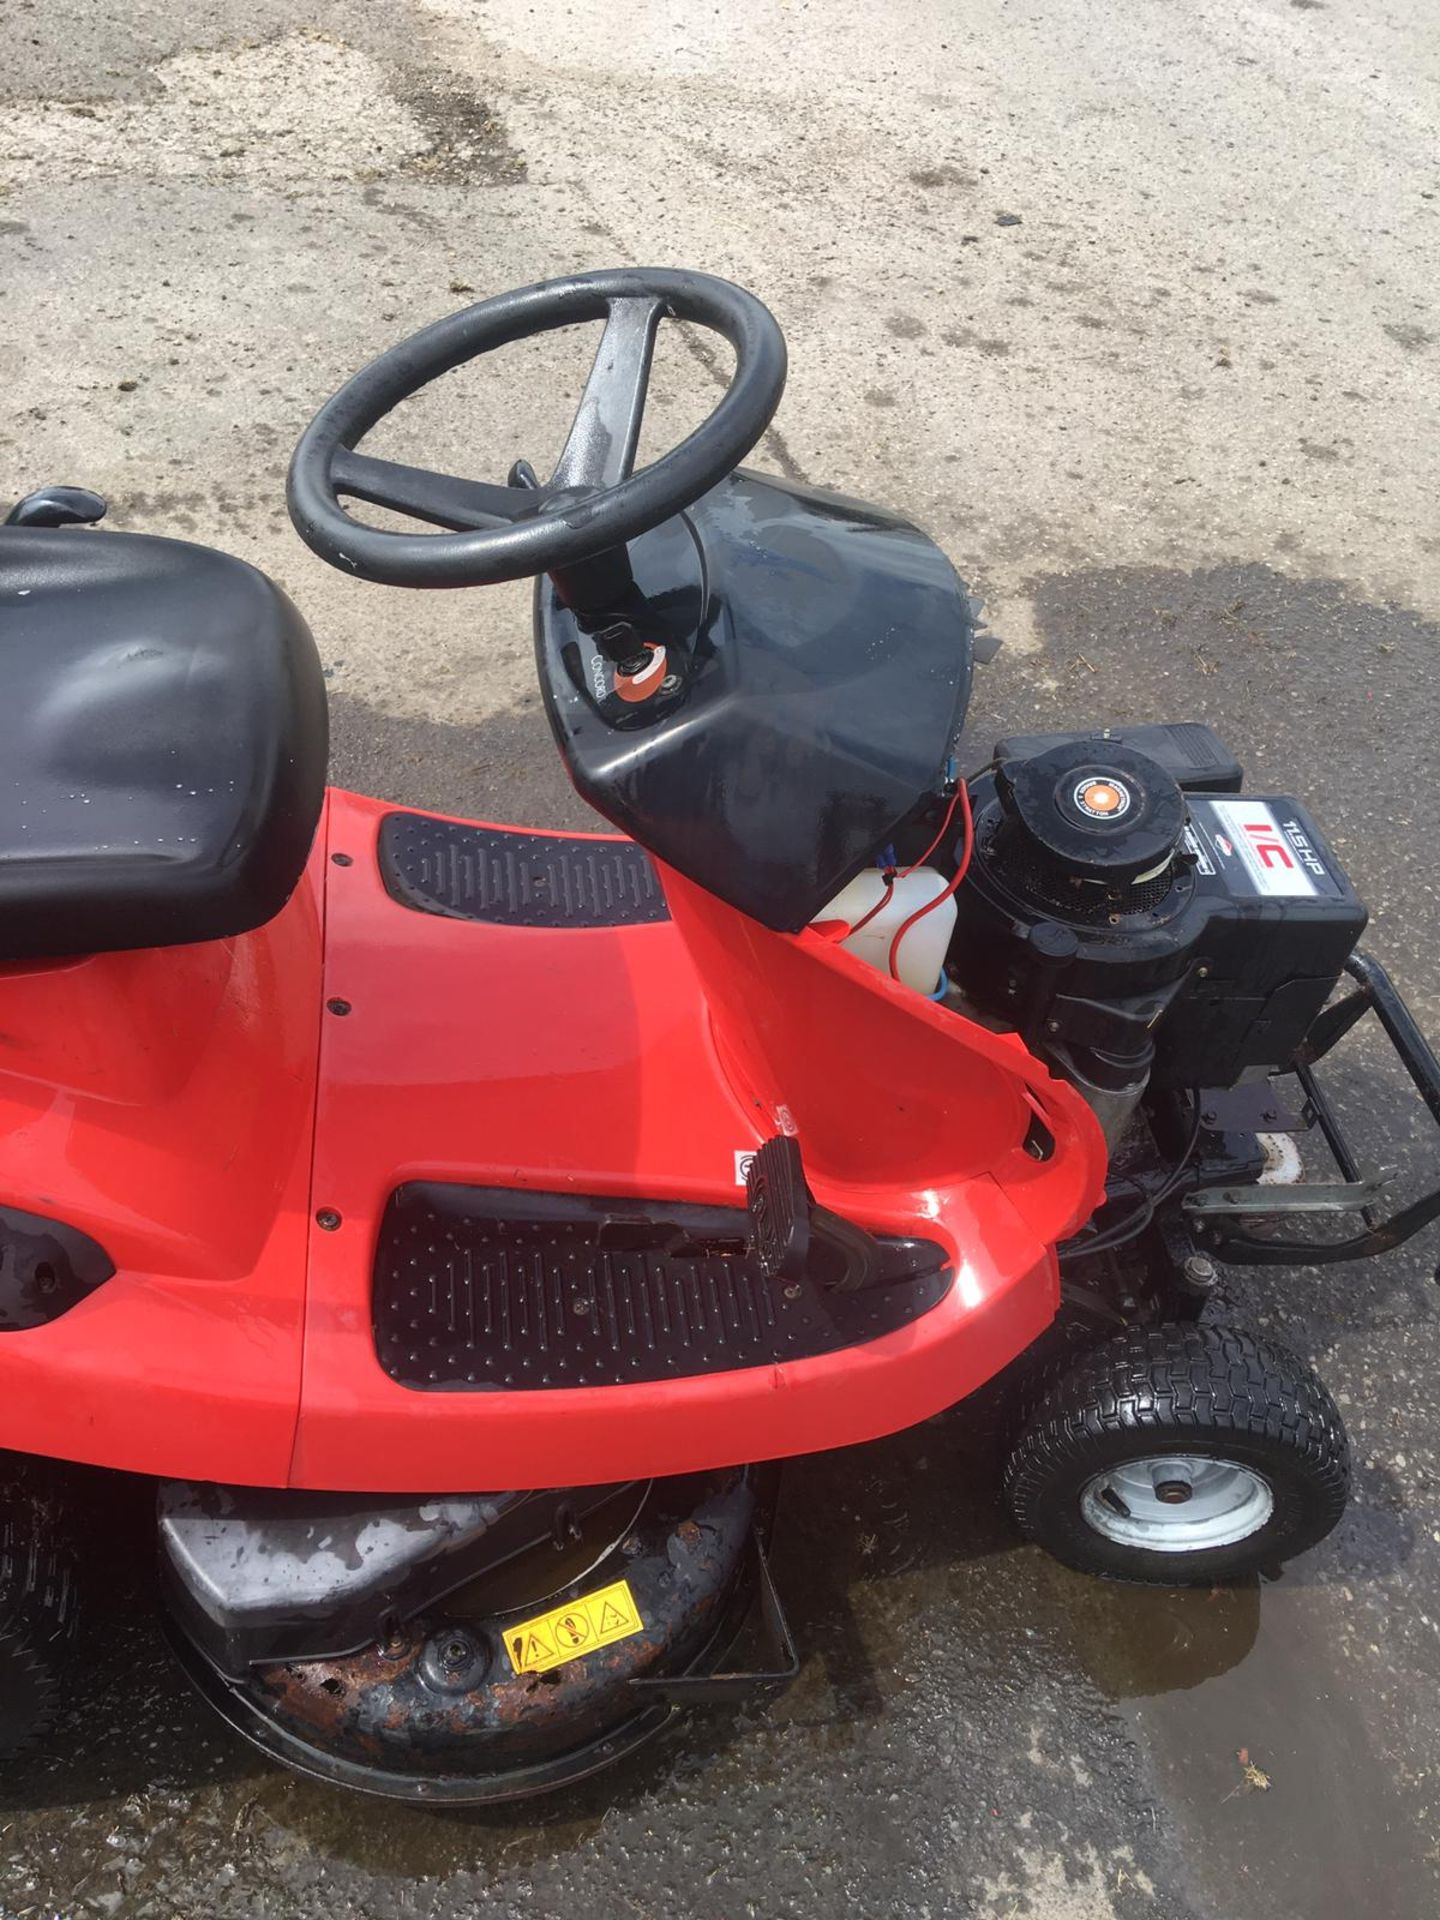 AL-KO T15-102 HD RIDE ON LAWN MOWER, 225 KG, YEAR 2002, C/W REAR GRASS COLLECTOR, 11.5HP I/C ENGINE - Image 4 of 11